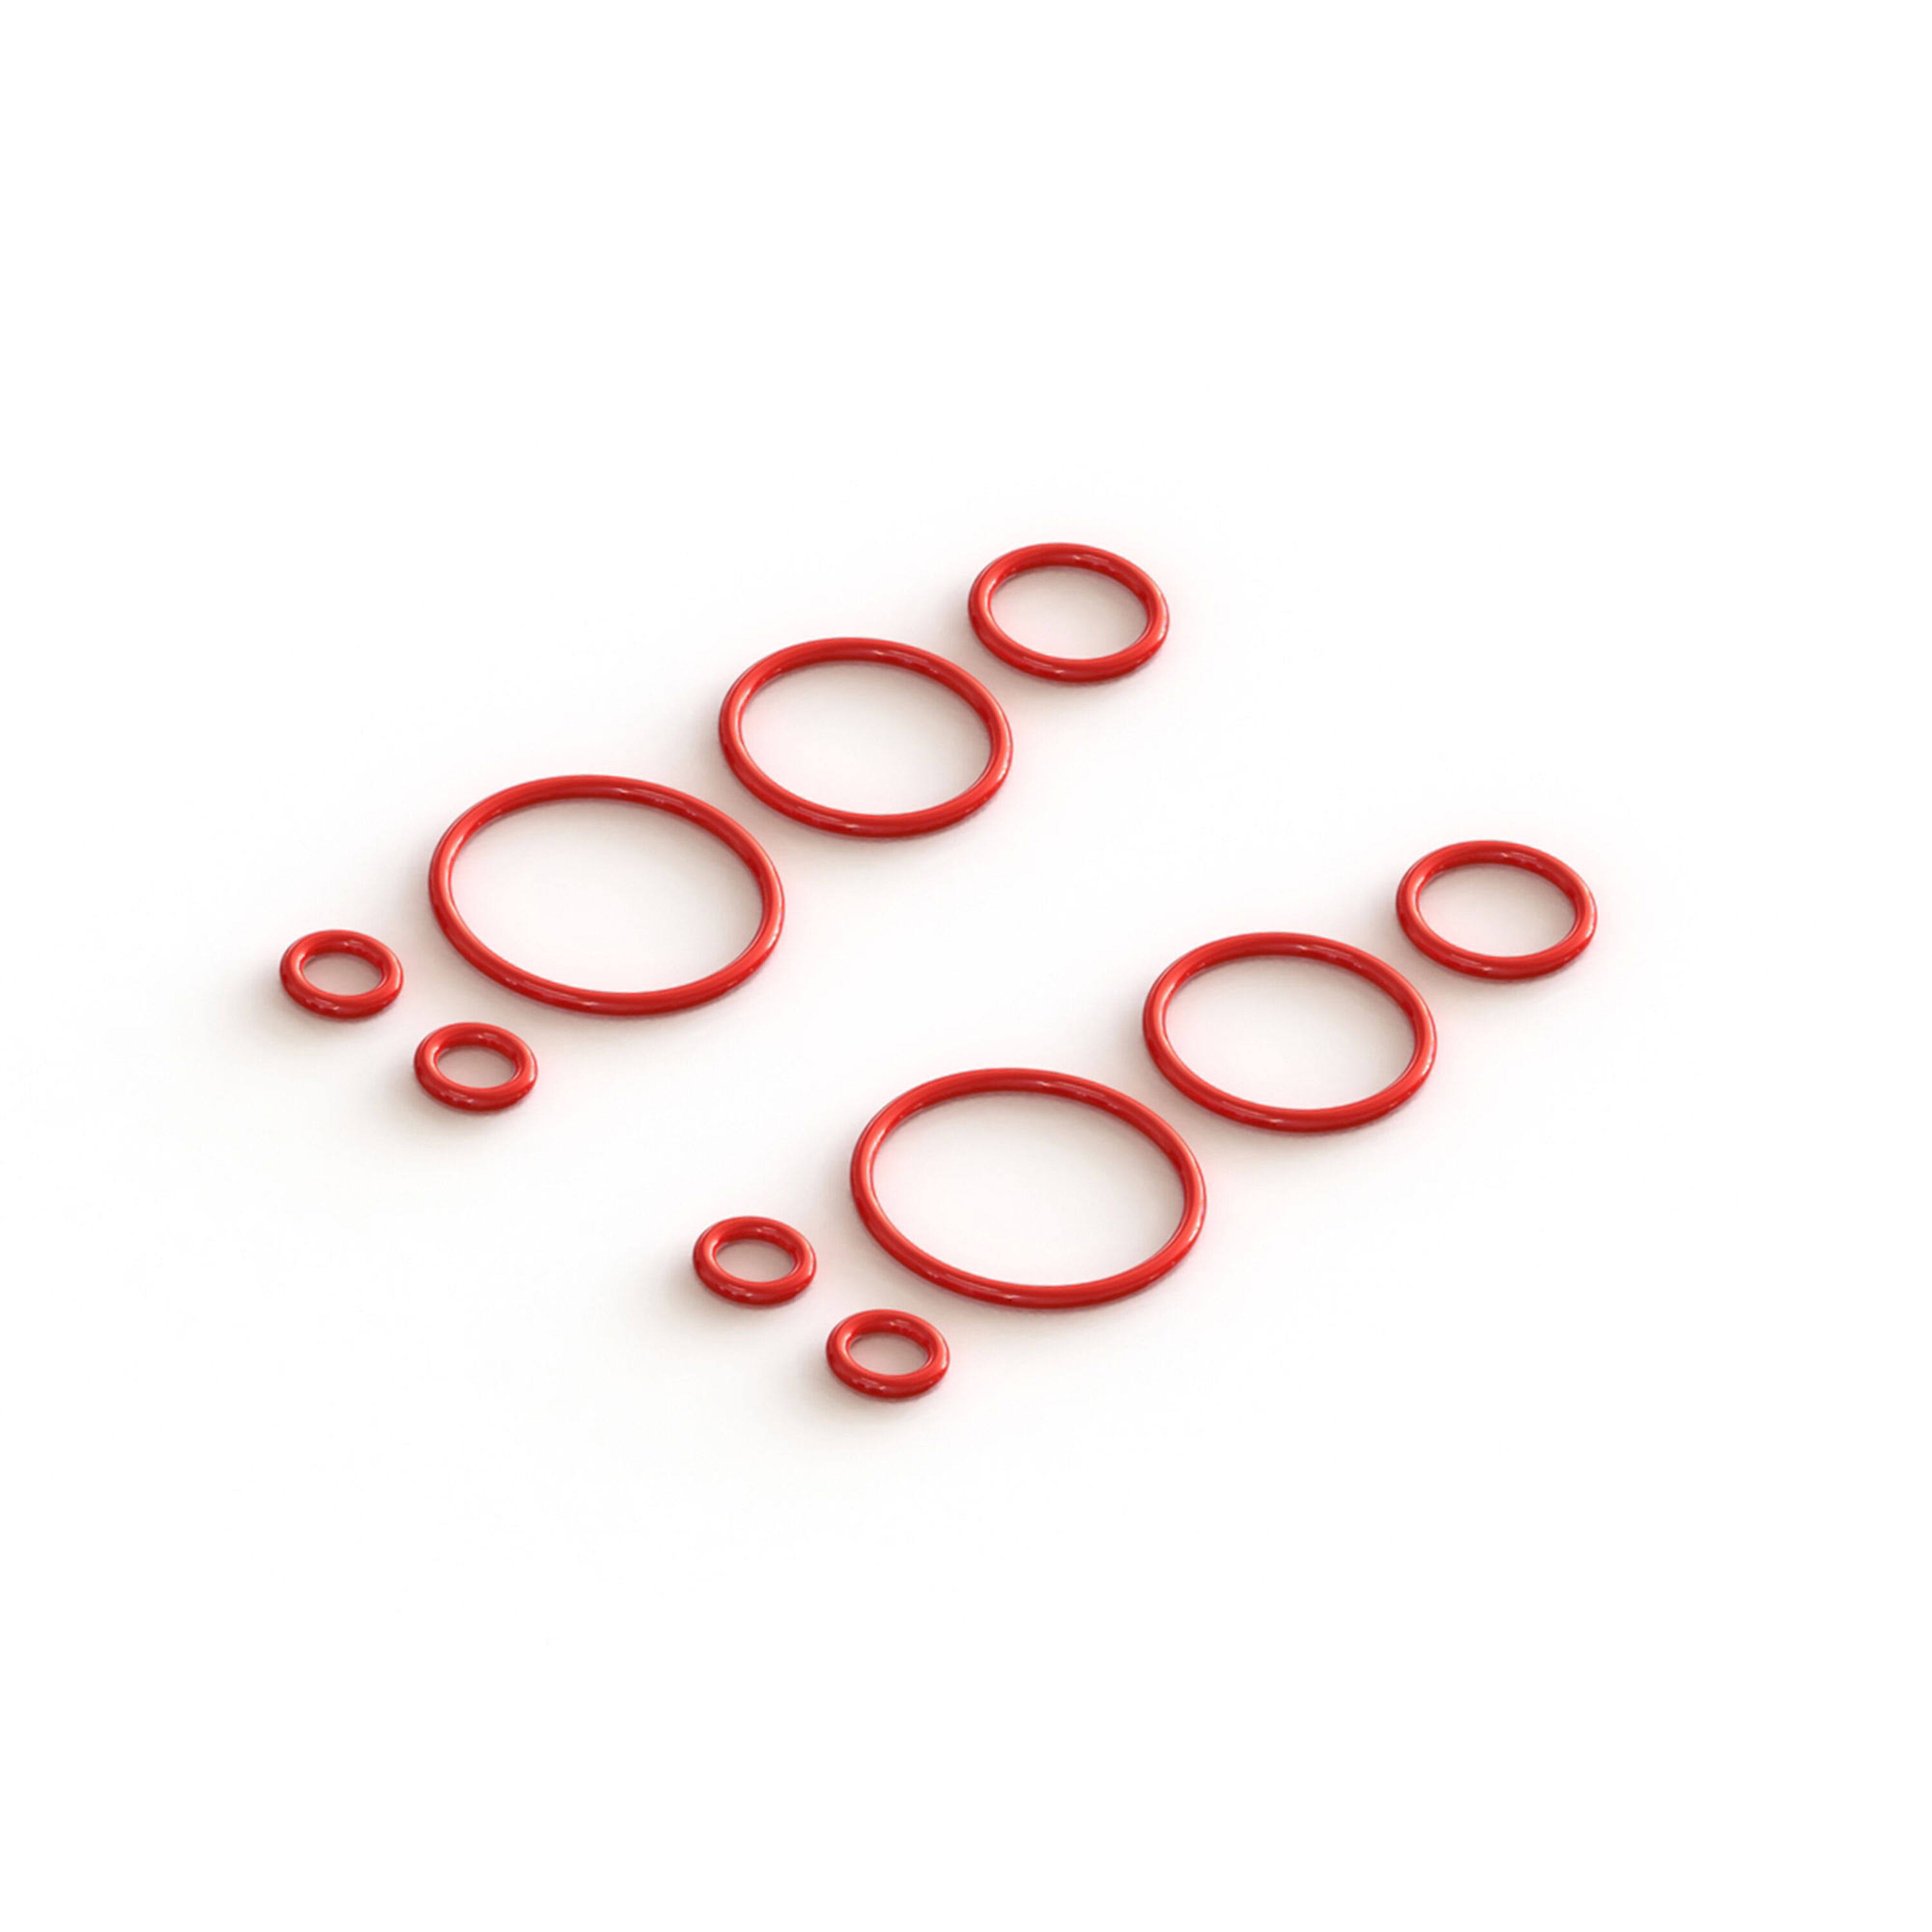 Pro-Line 1/10 O-Ring Replacement Kit for Shocks PRO636401